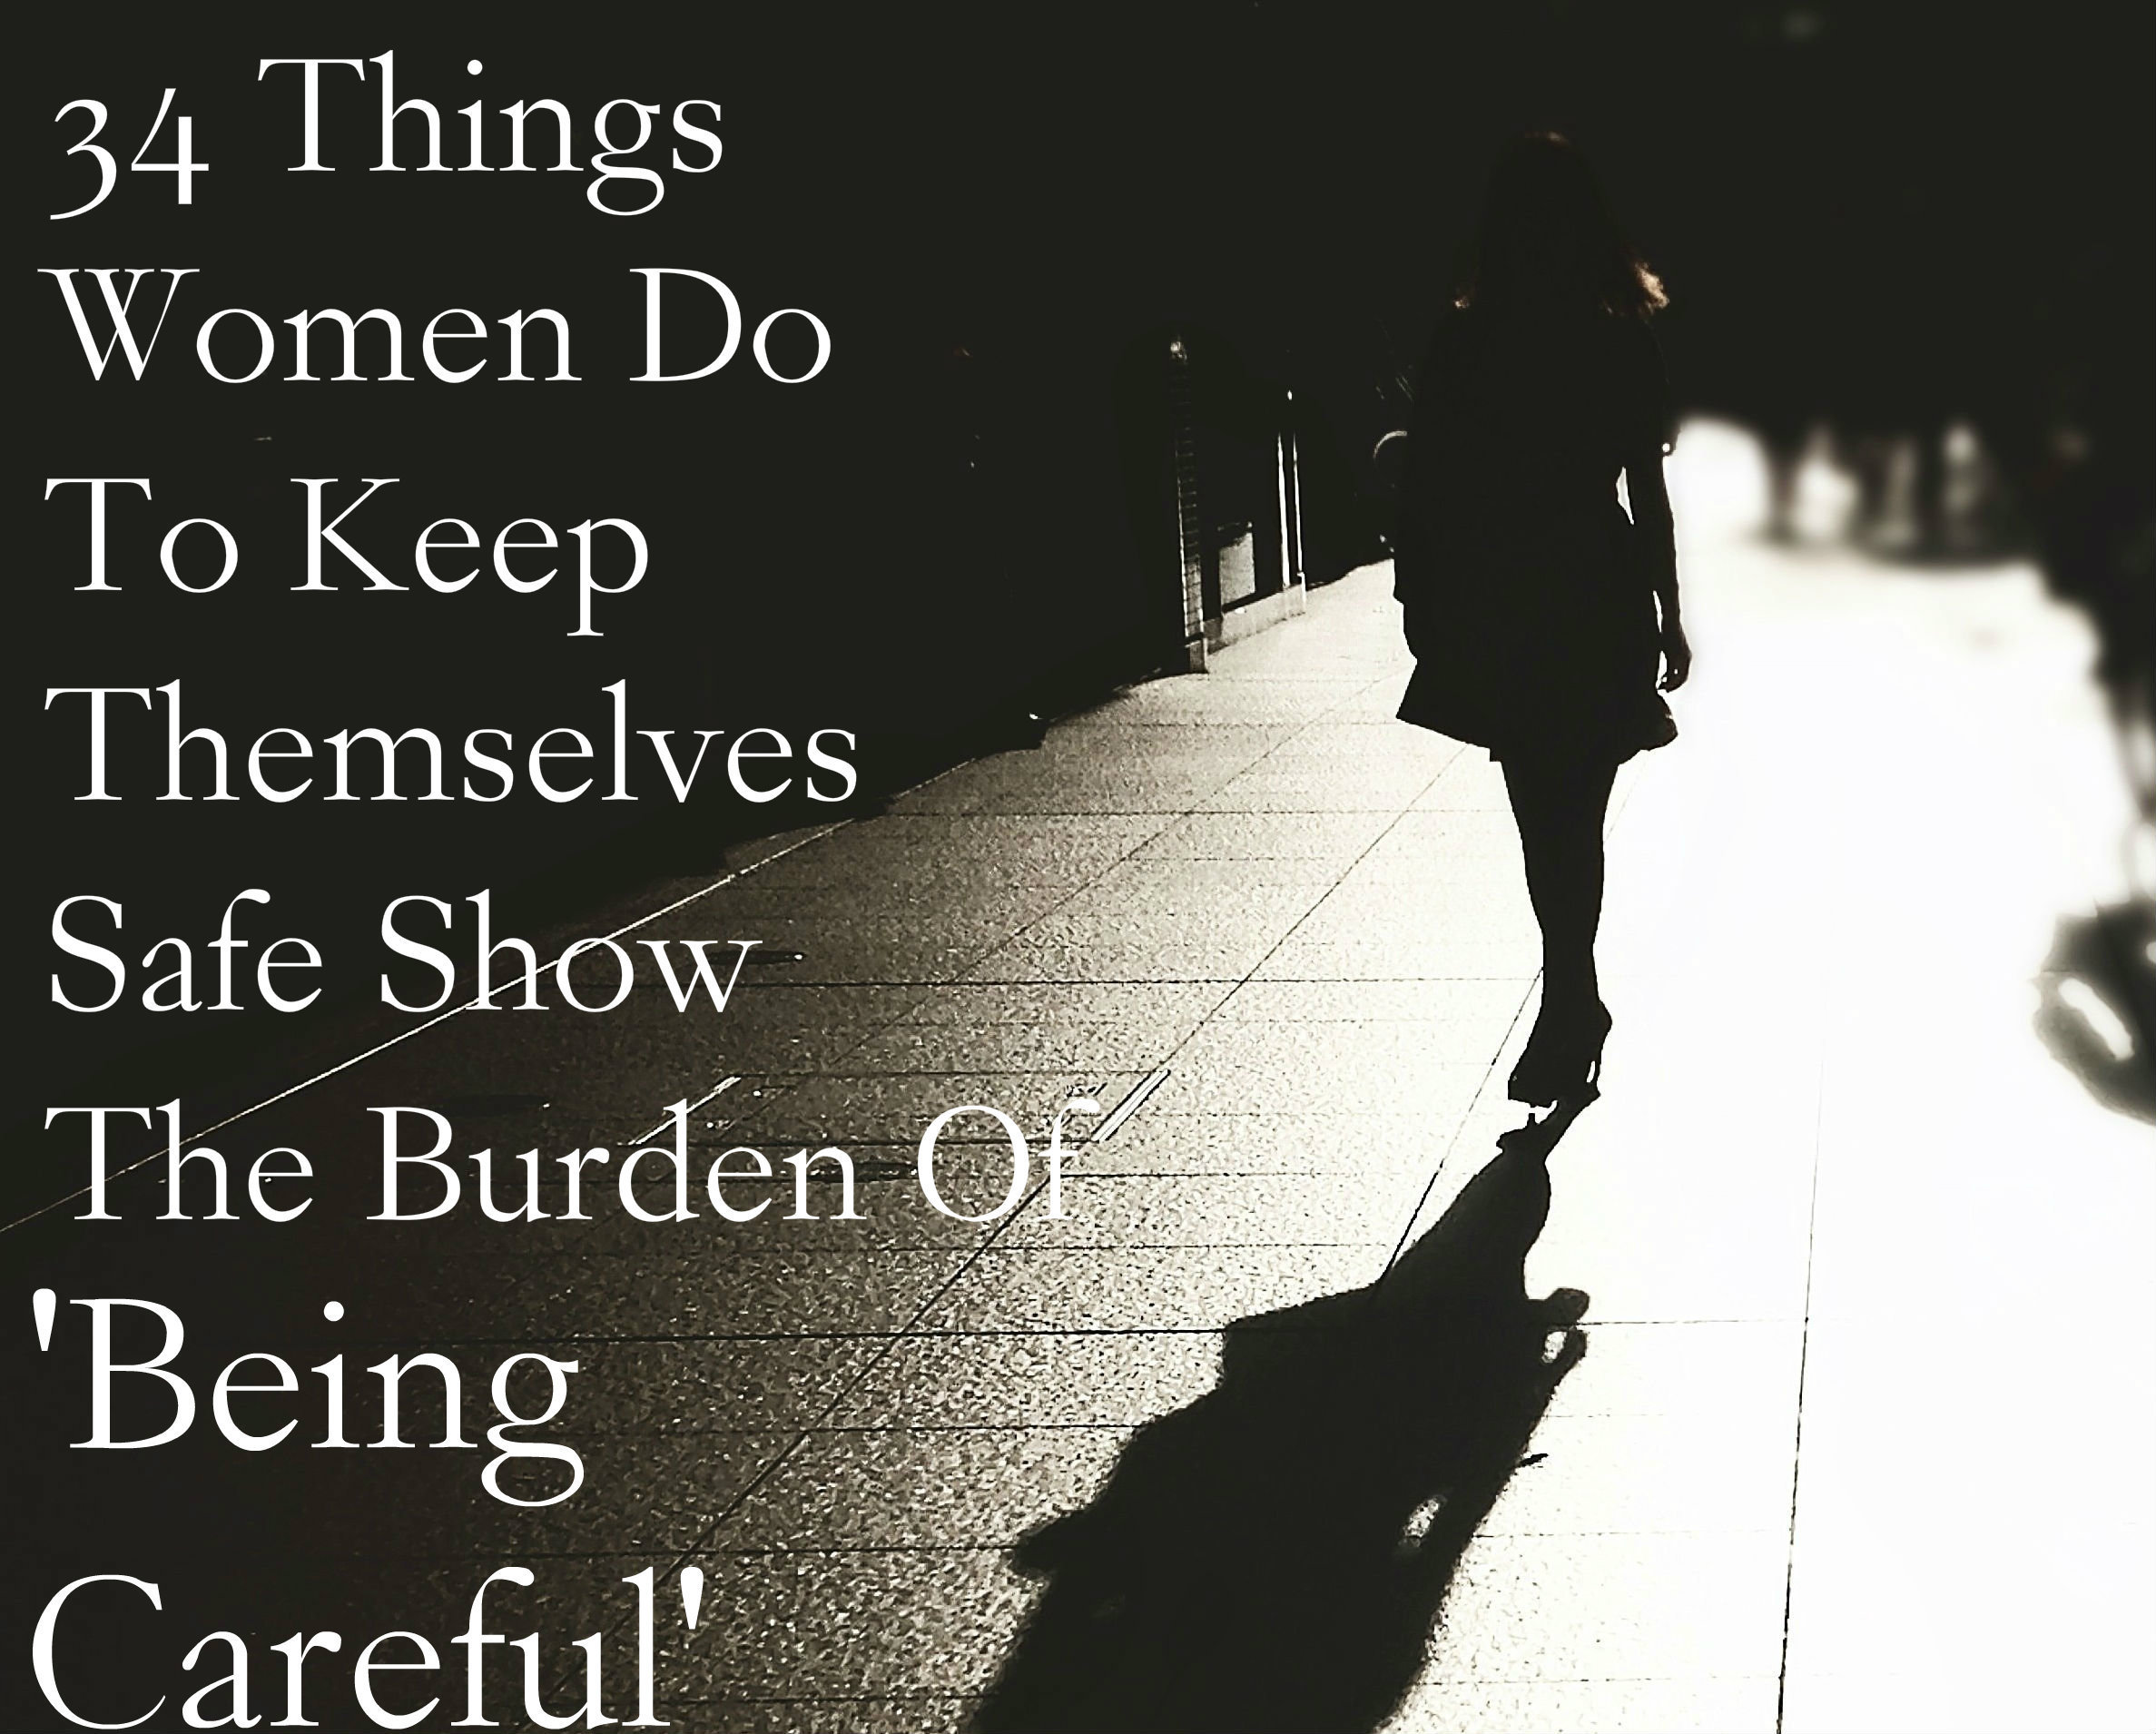 34 Things Women Do To Stay Safe Show The Burden Of 'Being Careful'